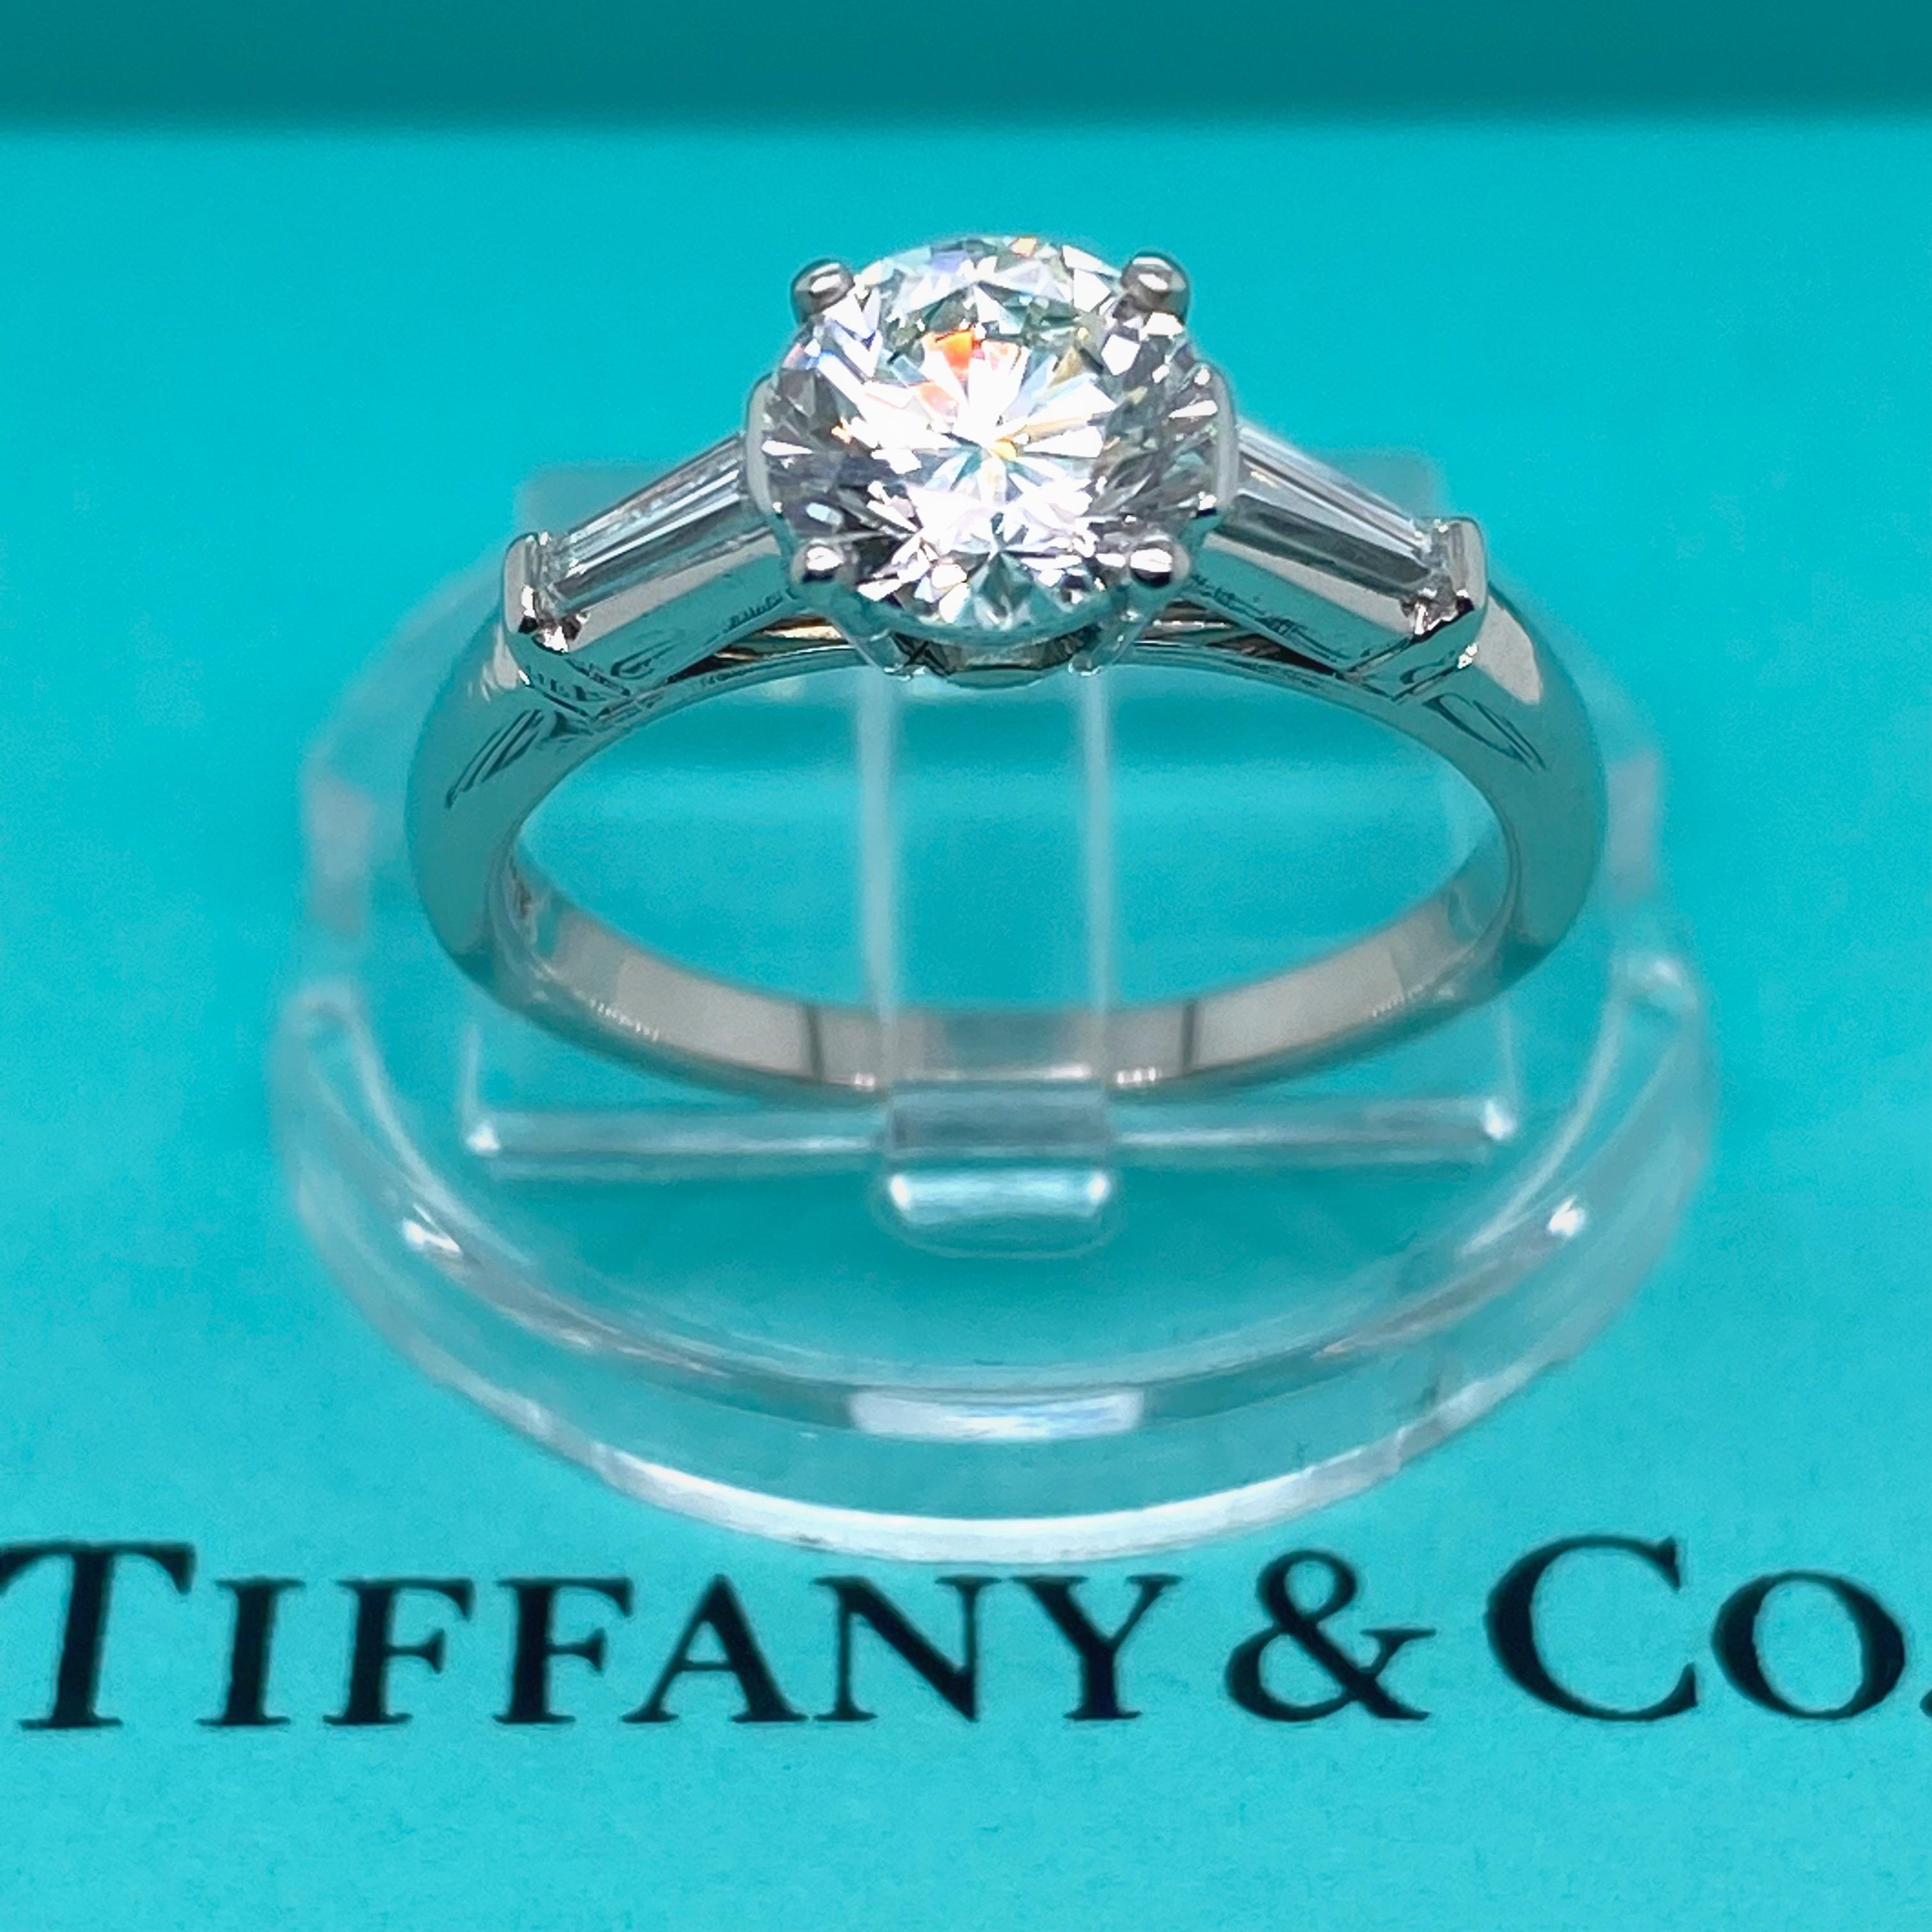 Tiffany & Co 1.36 Tcw Round Diamond with Baguette Side Stones Engagement Ring In Excellent Condition For Sale In San Diego, CA